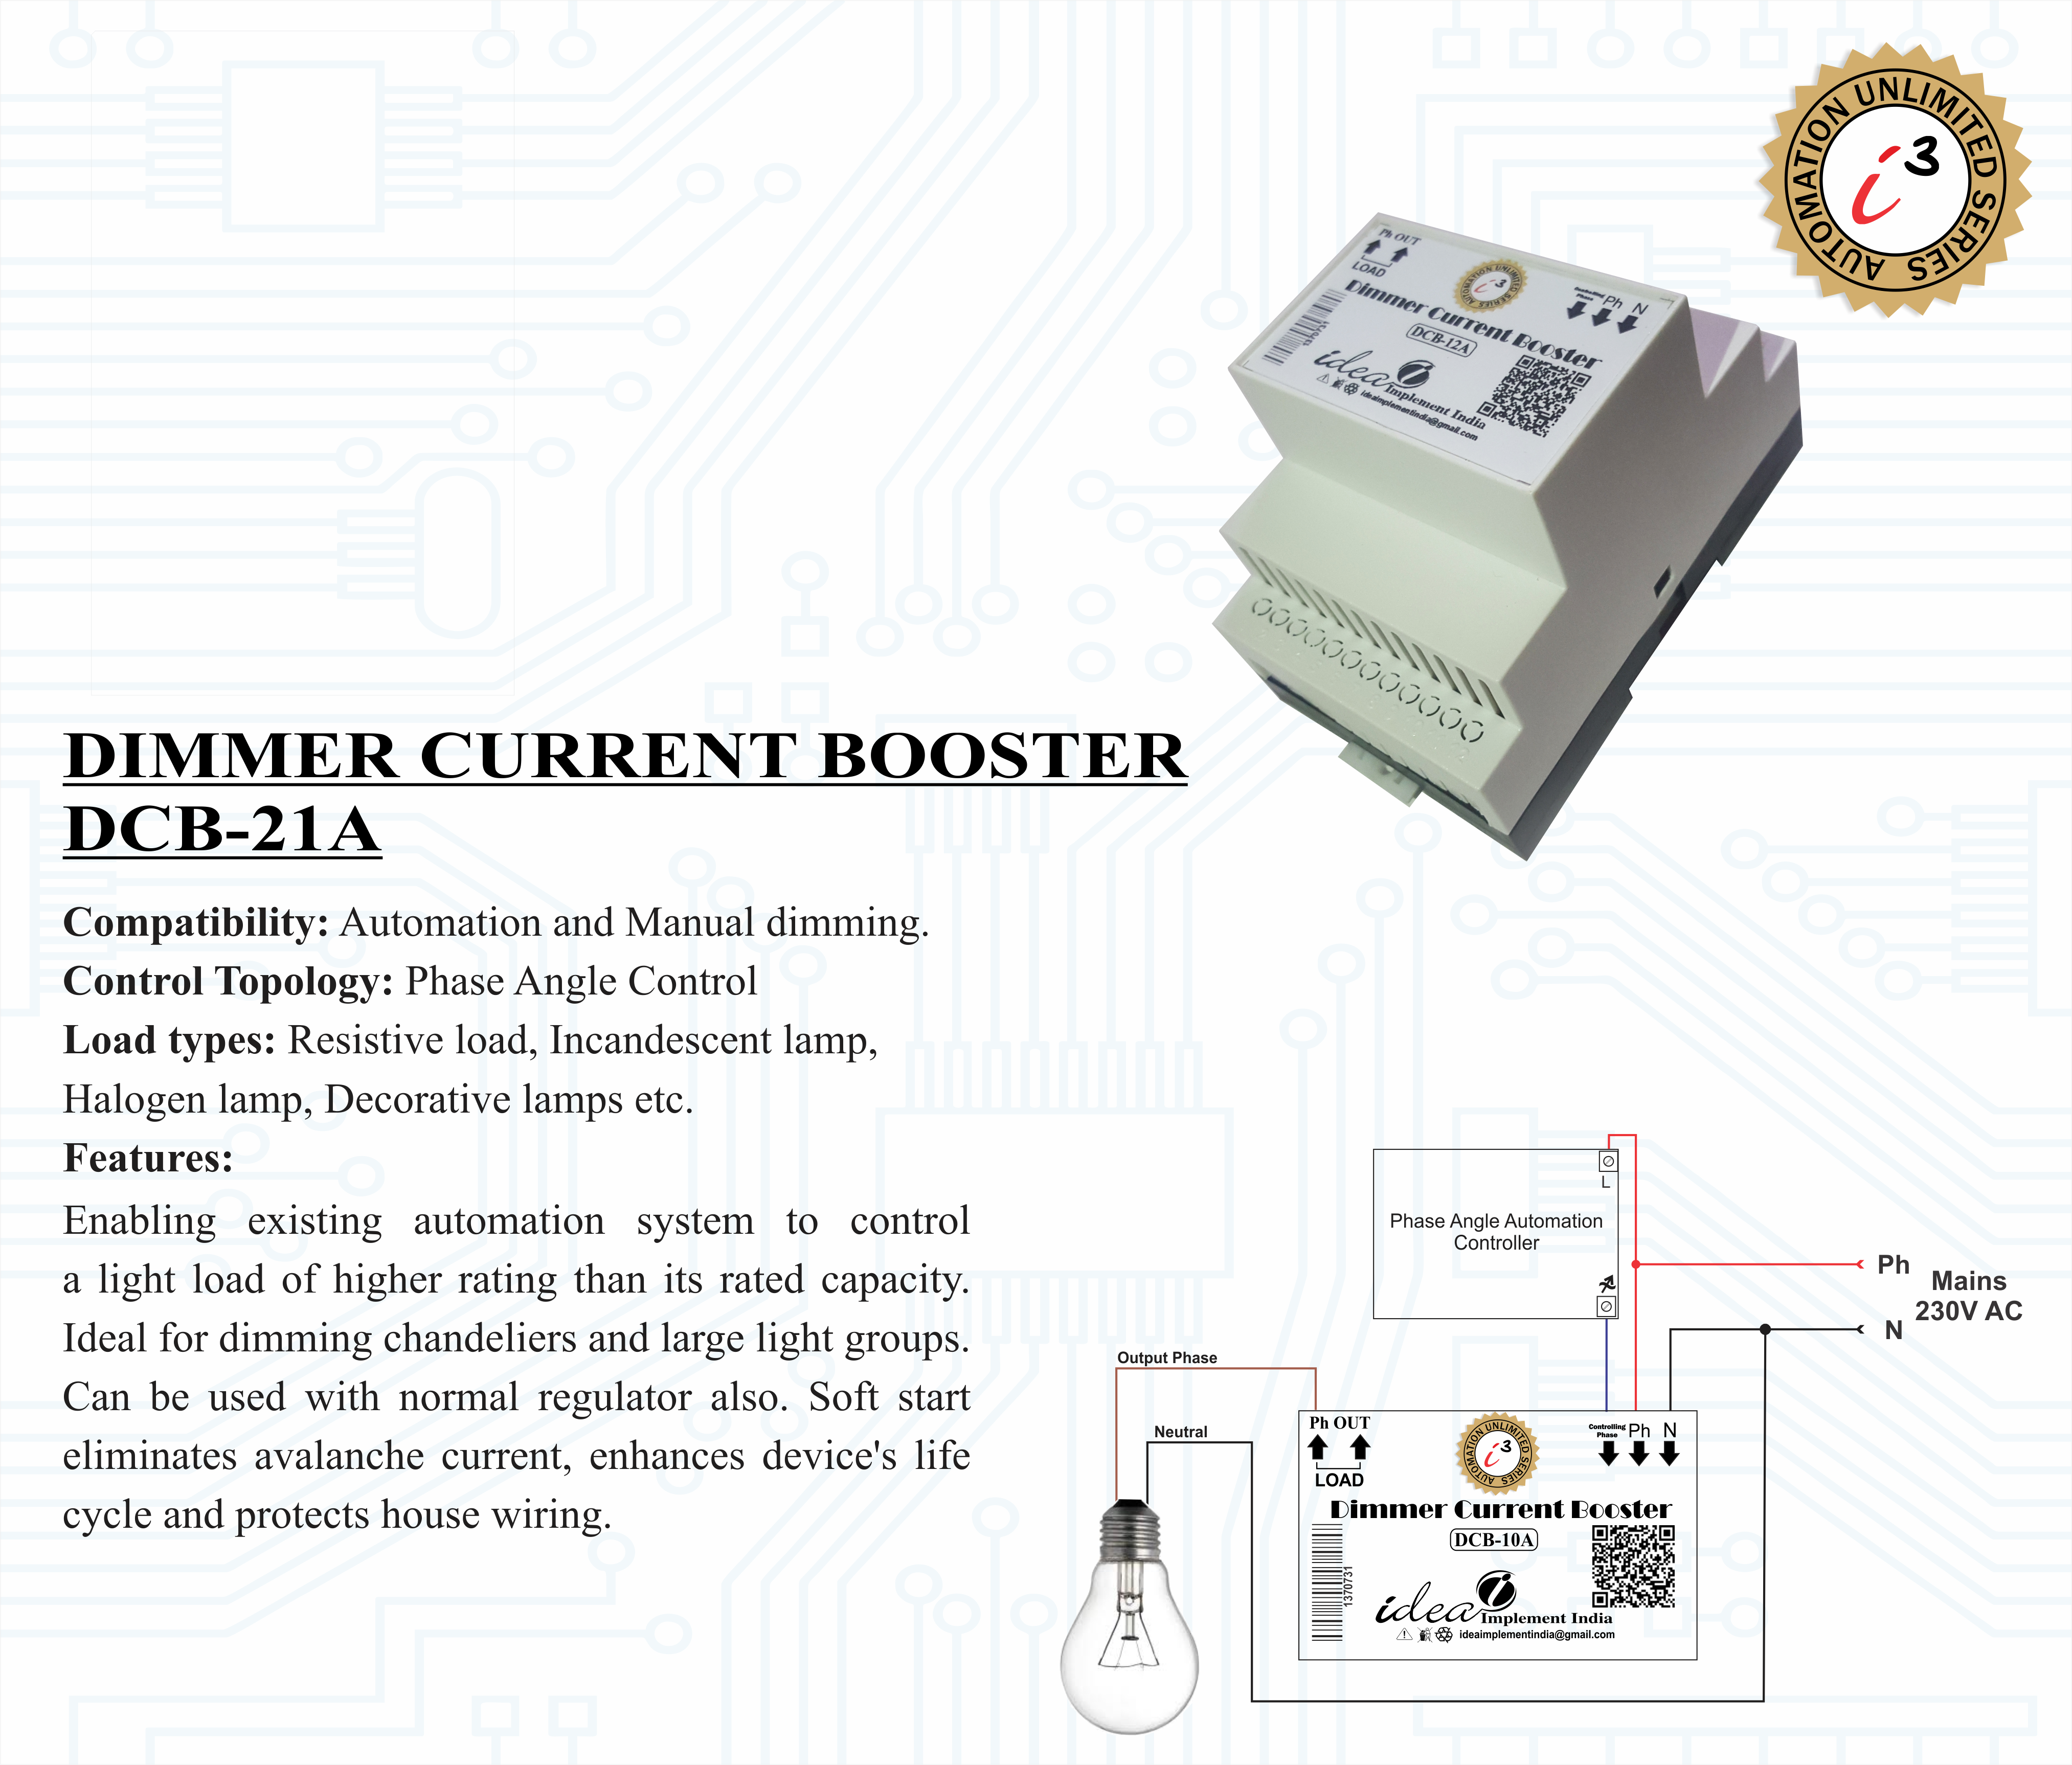 DIMMER CURRENT BOOSTER DCB-21A